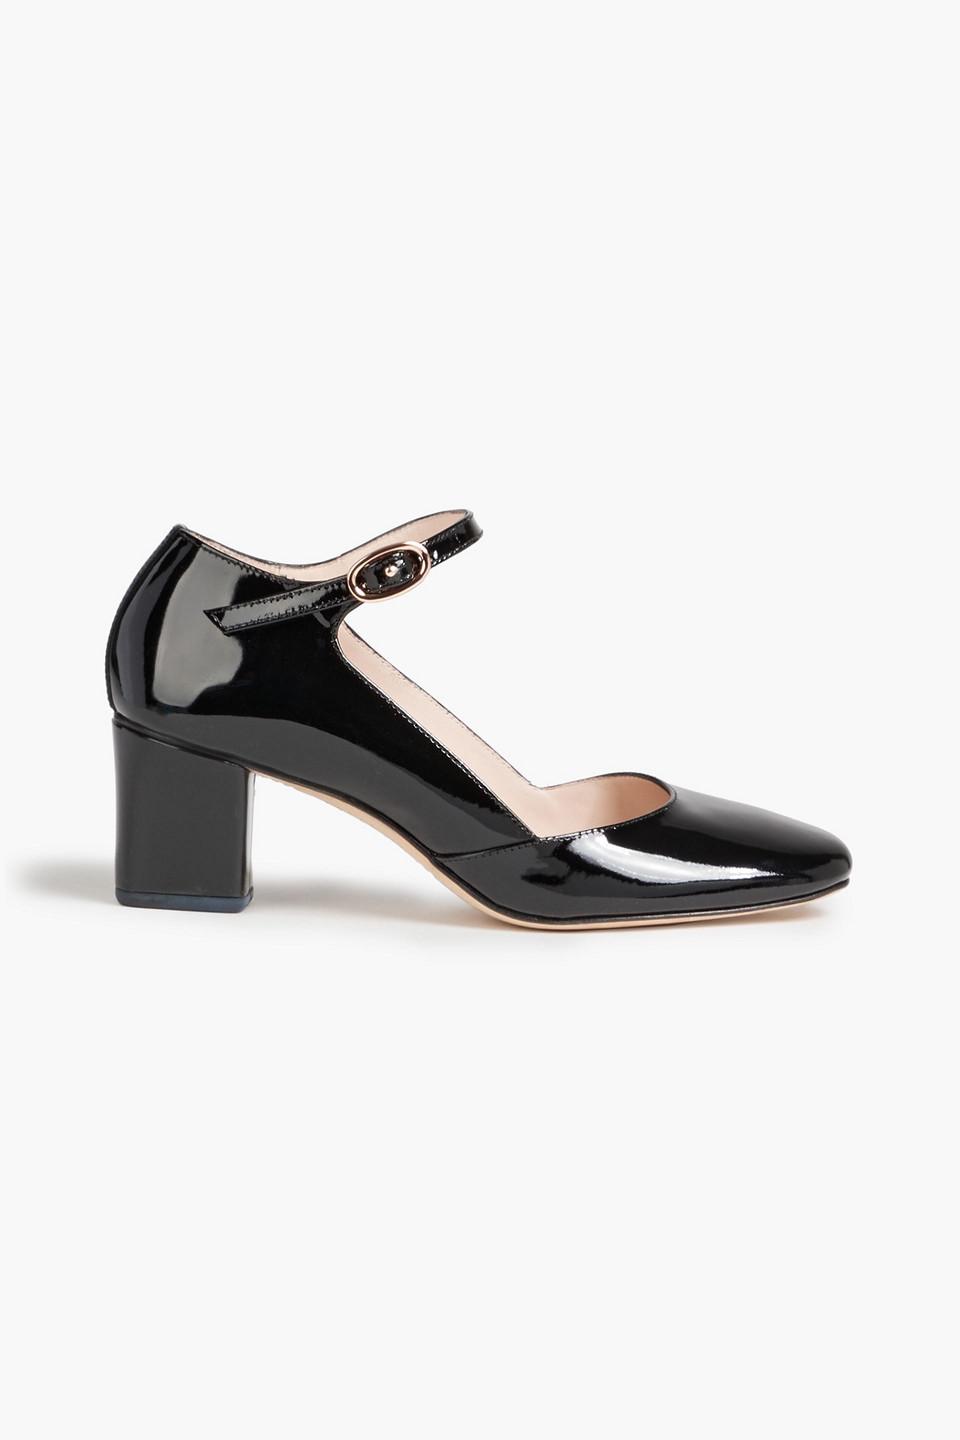 Repetto Dolly Patent-leather Mary Jane Pumps in Black | Lyst